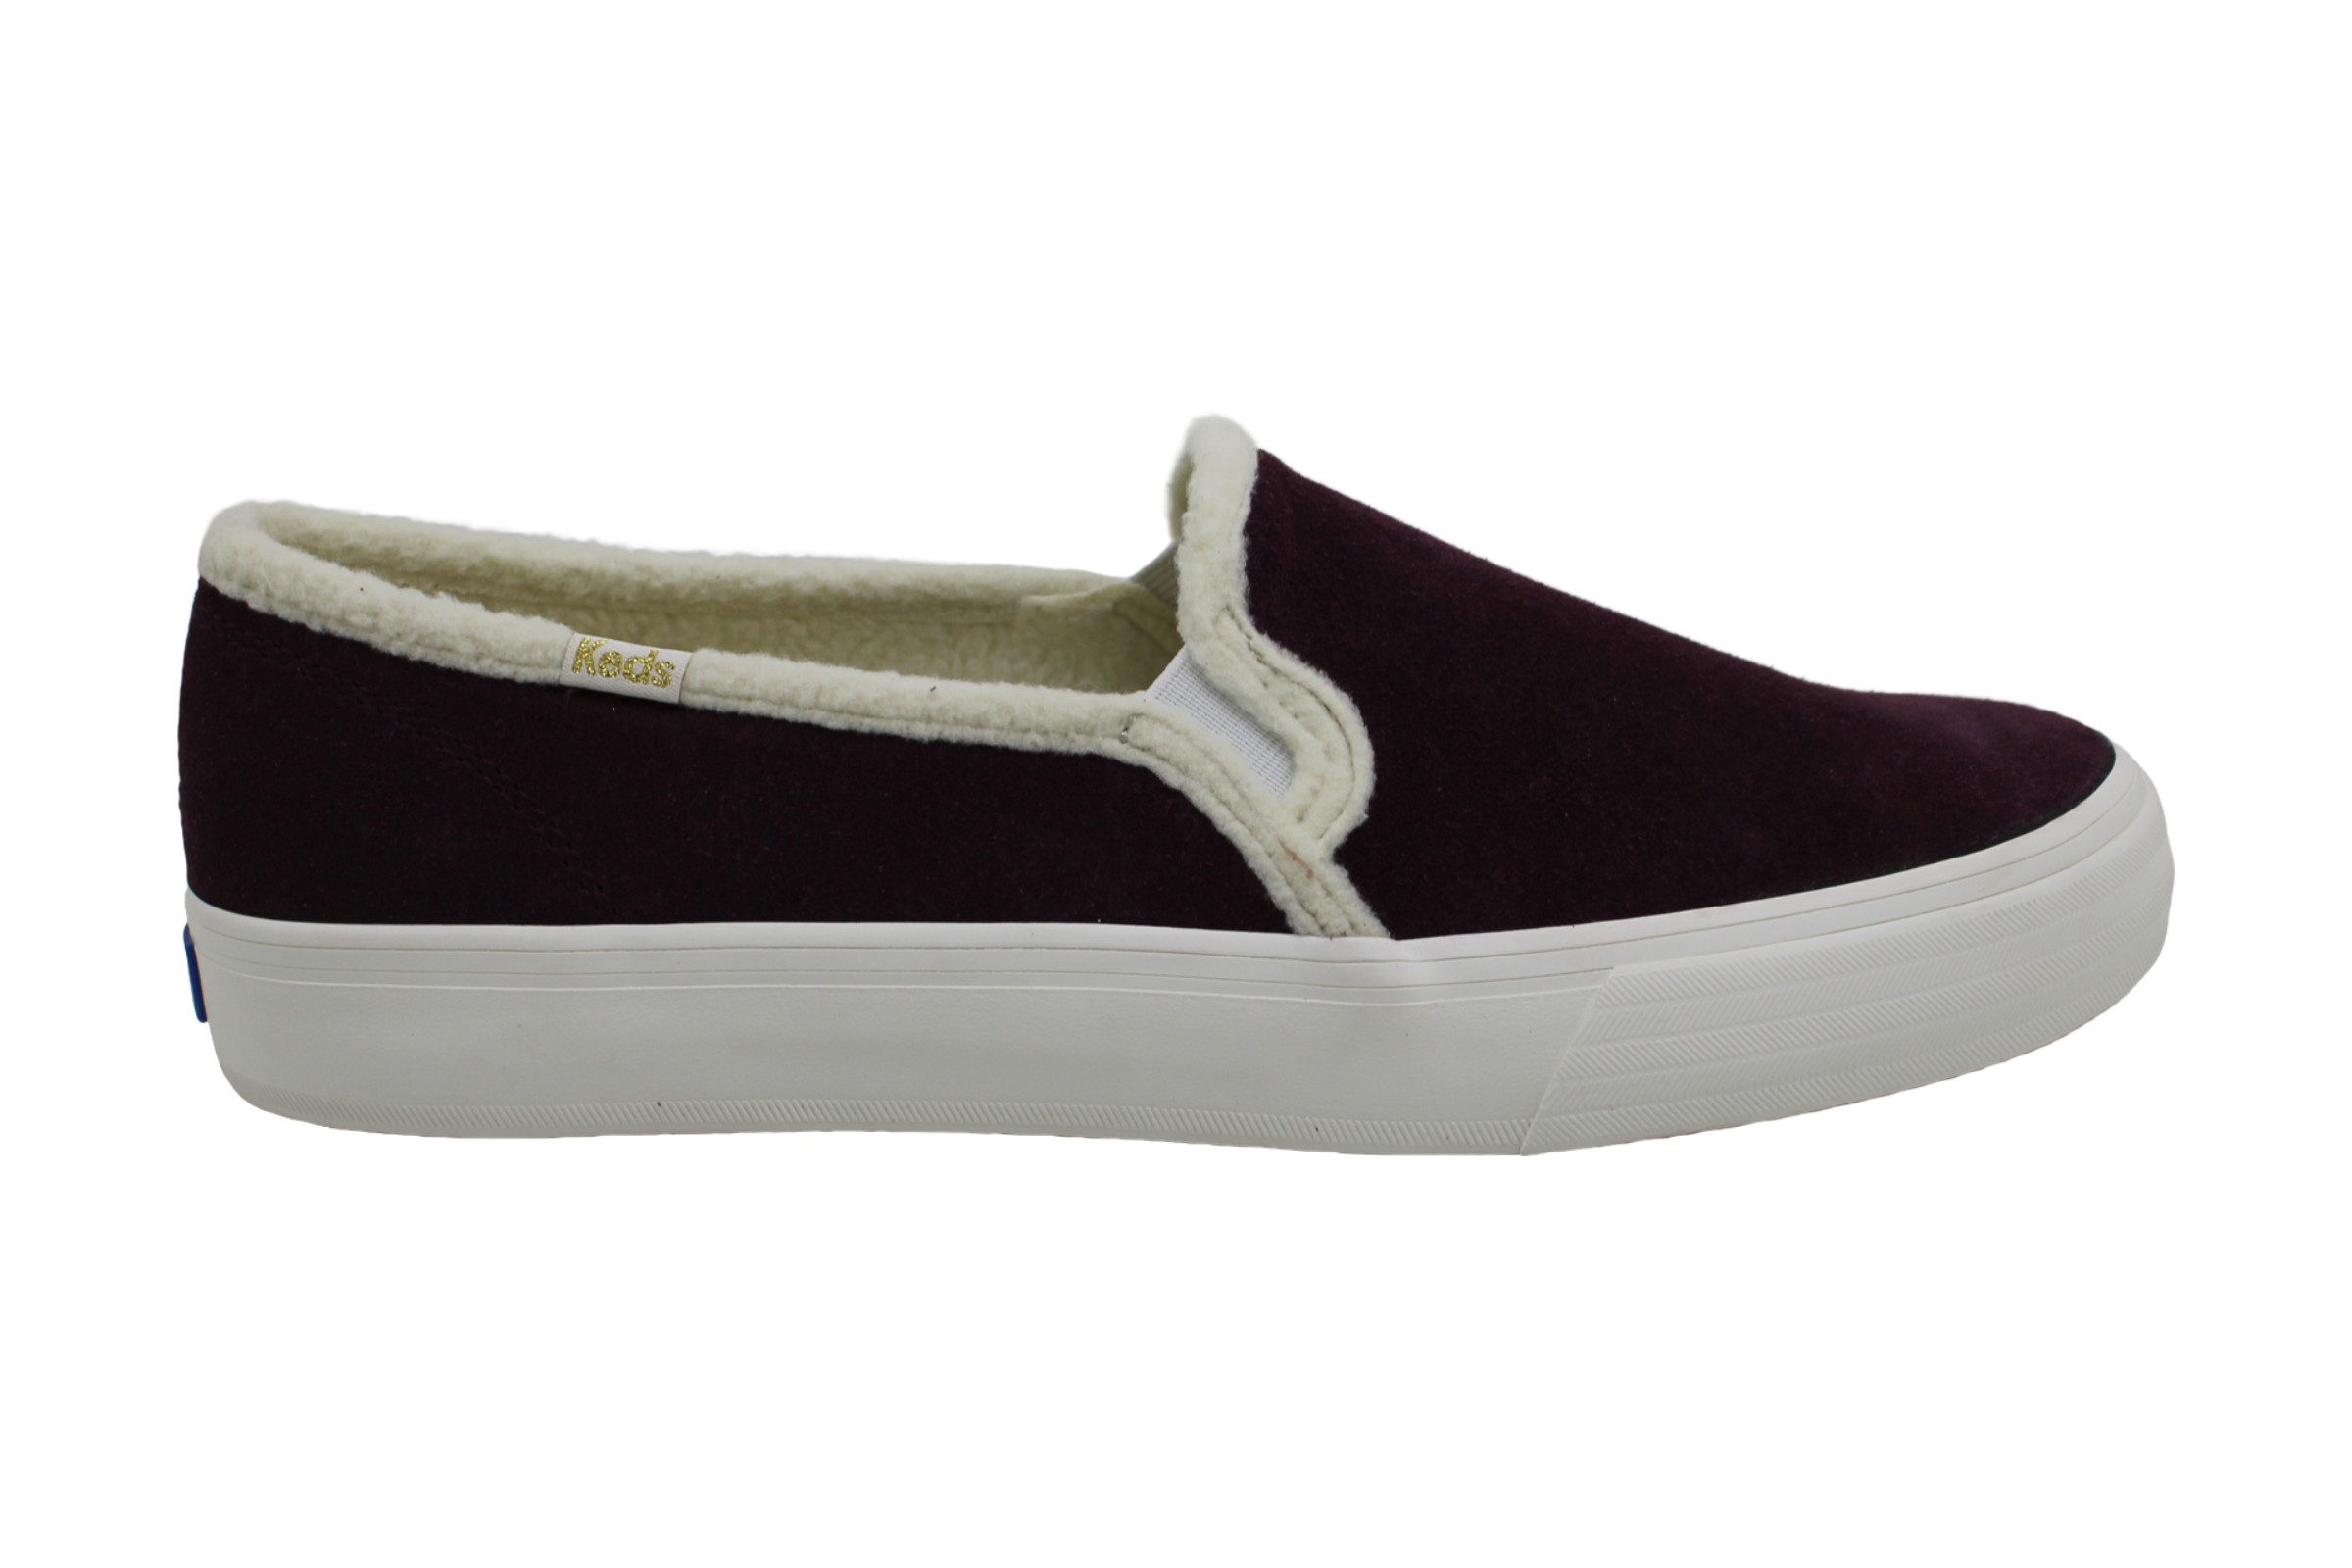 Keds Womens Double Decker Fabric Low Top Slip On Fashion ...